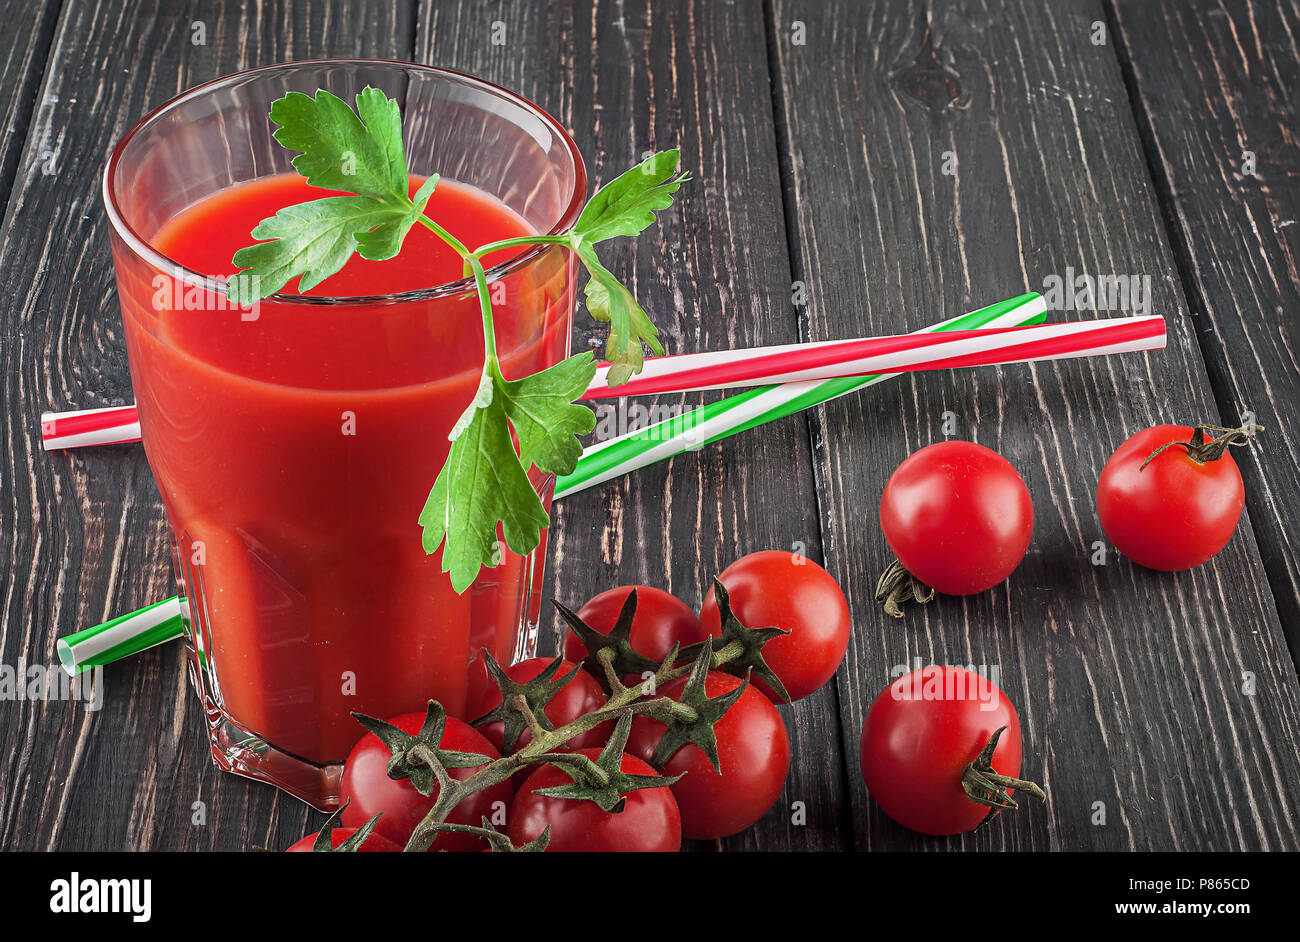 Glass of tomato juice on wooden table Stock Photo